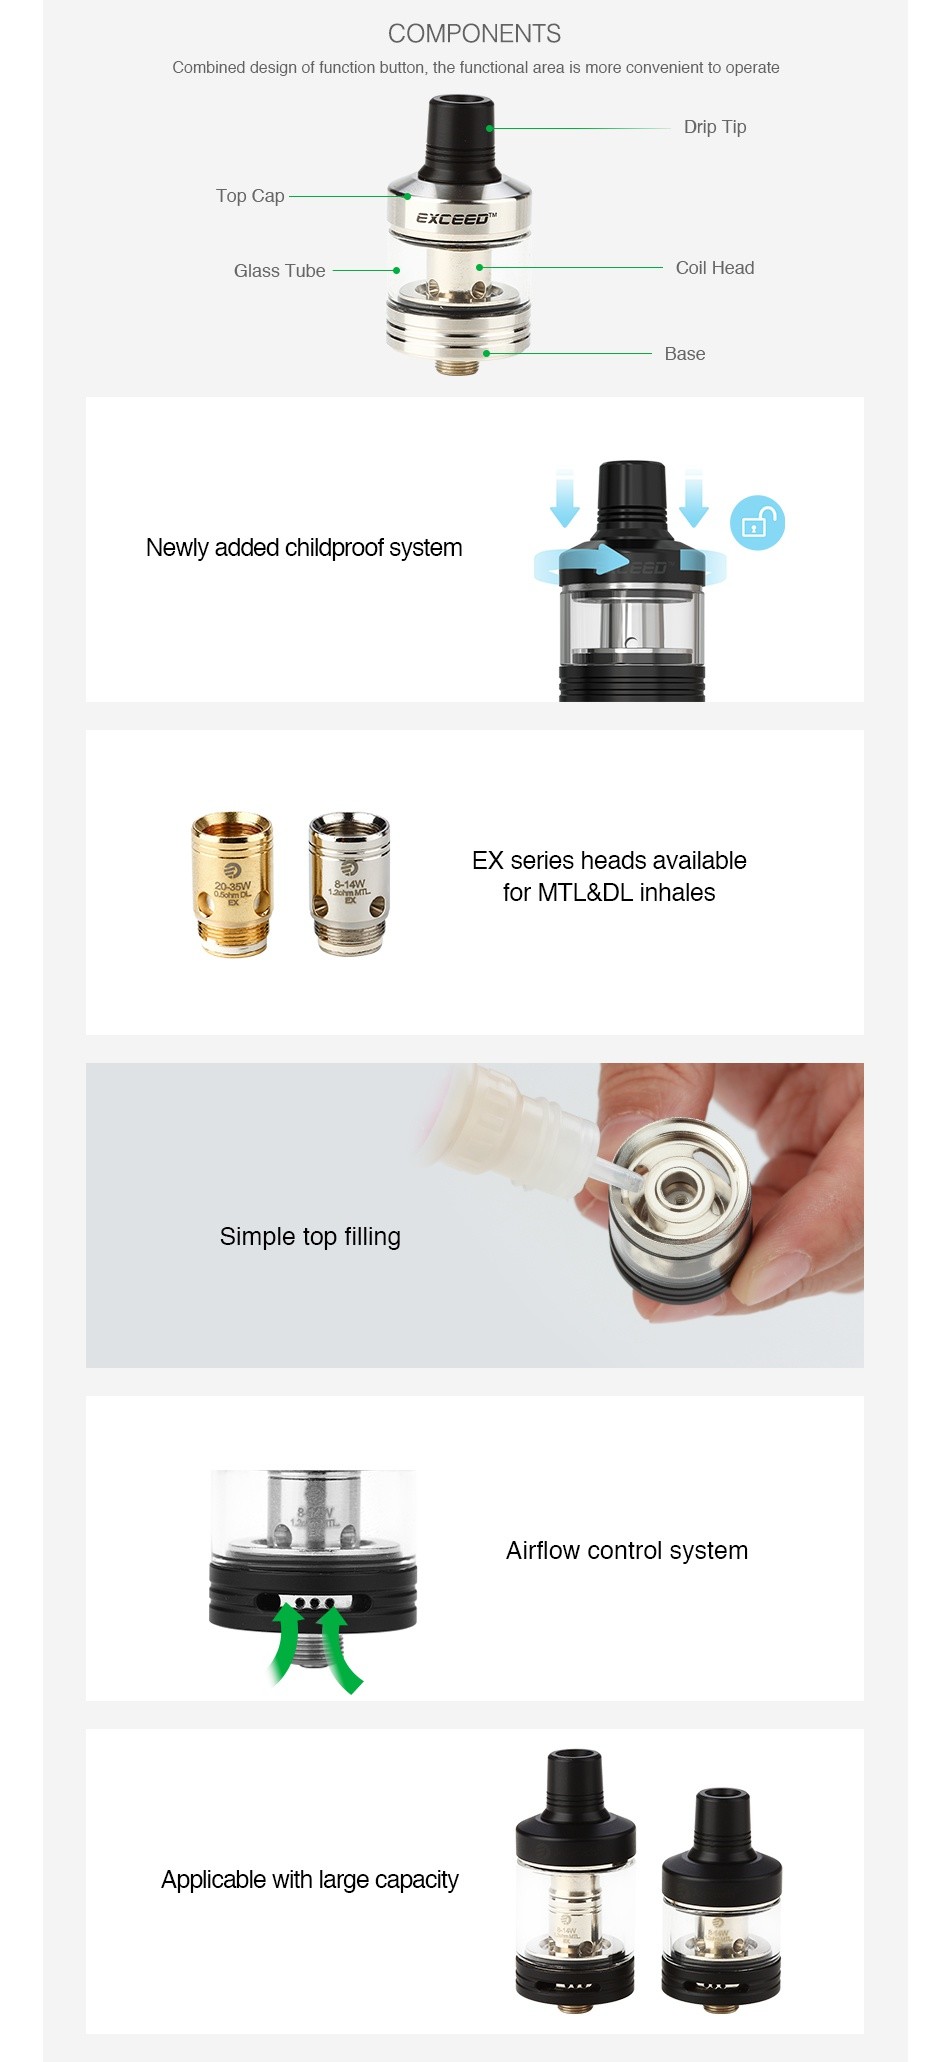 Joyetech Exceed D22C Atomizer 2ml COMPONENTS Combined design of function button  the functional area is more convenient to operate Drip Ti Top Ci EXCEED Glass Tube Coil head Base Newly added childproof system EX series heads available for mtl dl inhales Simple top filling Airflow control system Applicable with large capacity